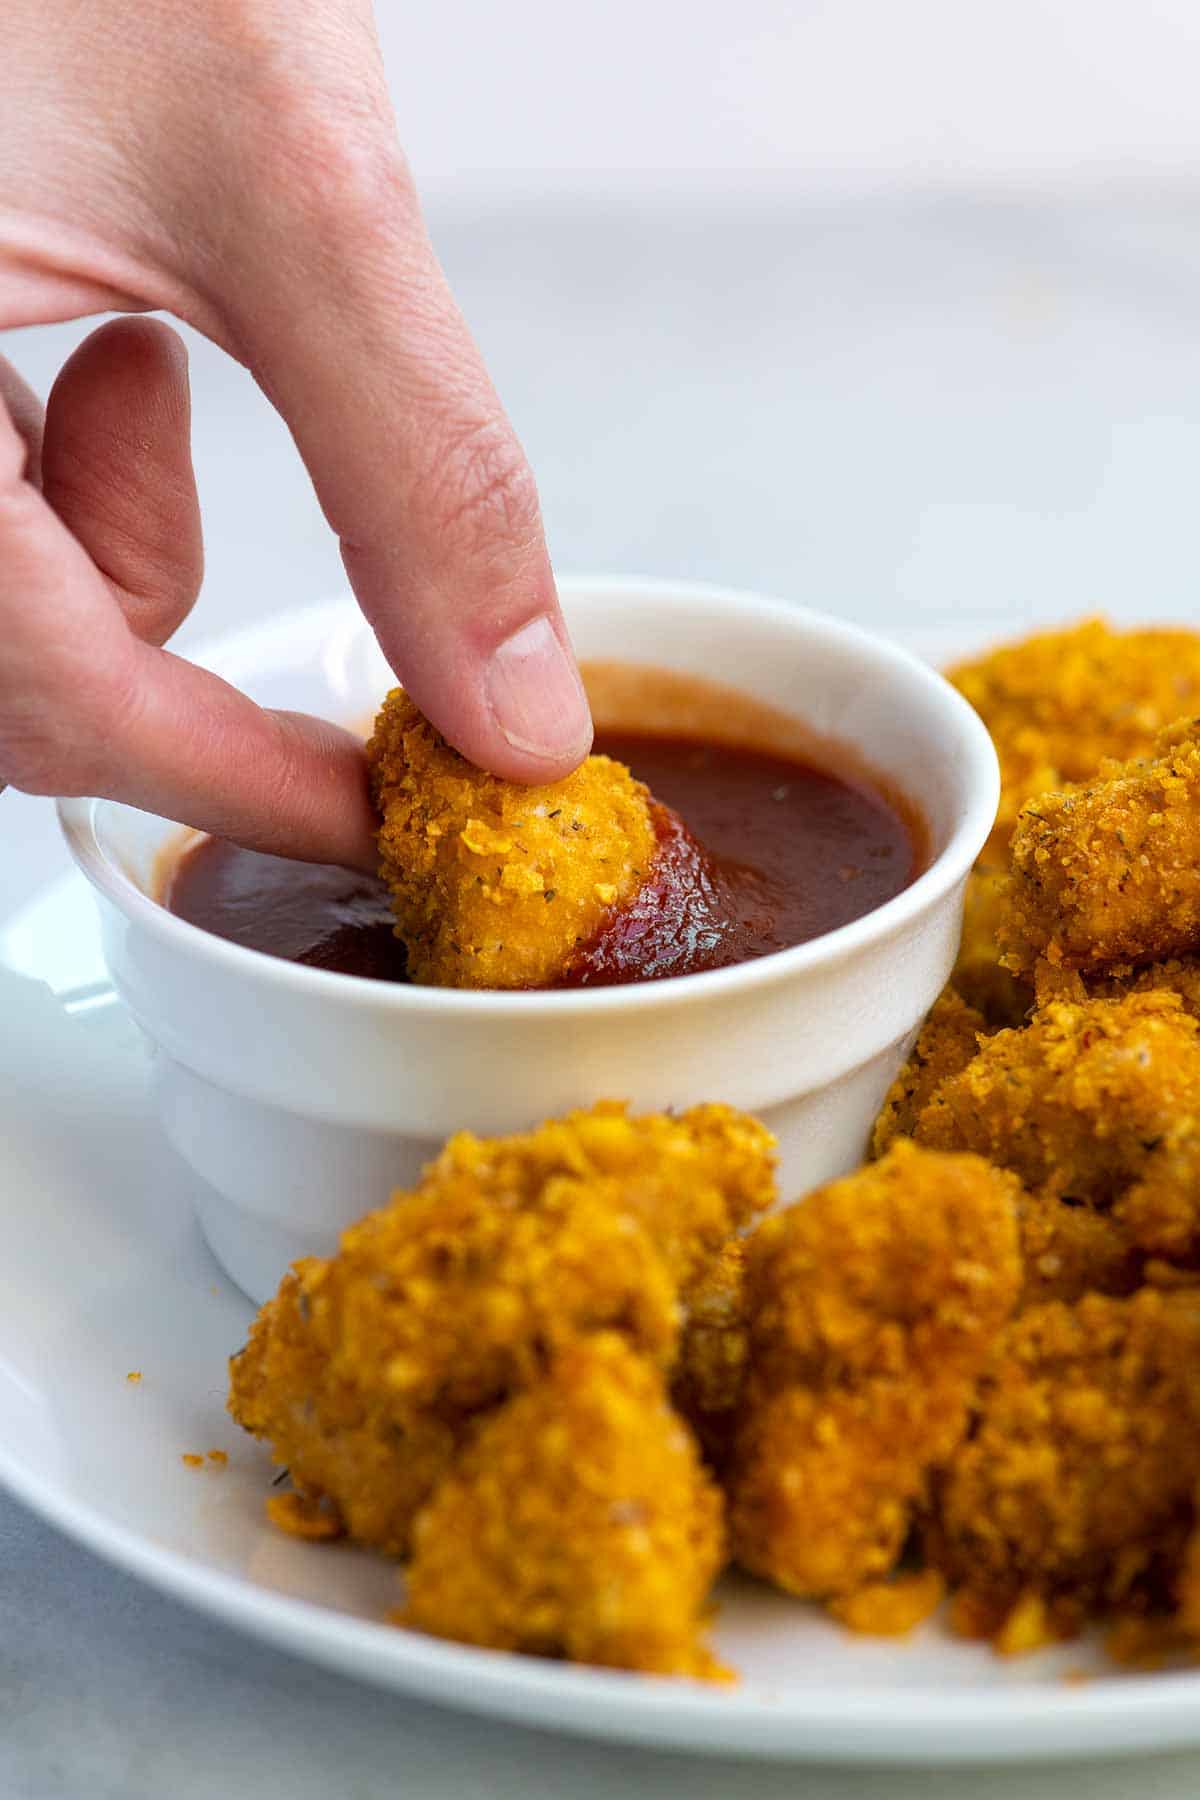 Dipping popcorn chicken into ketchup